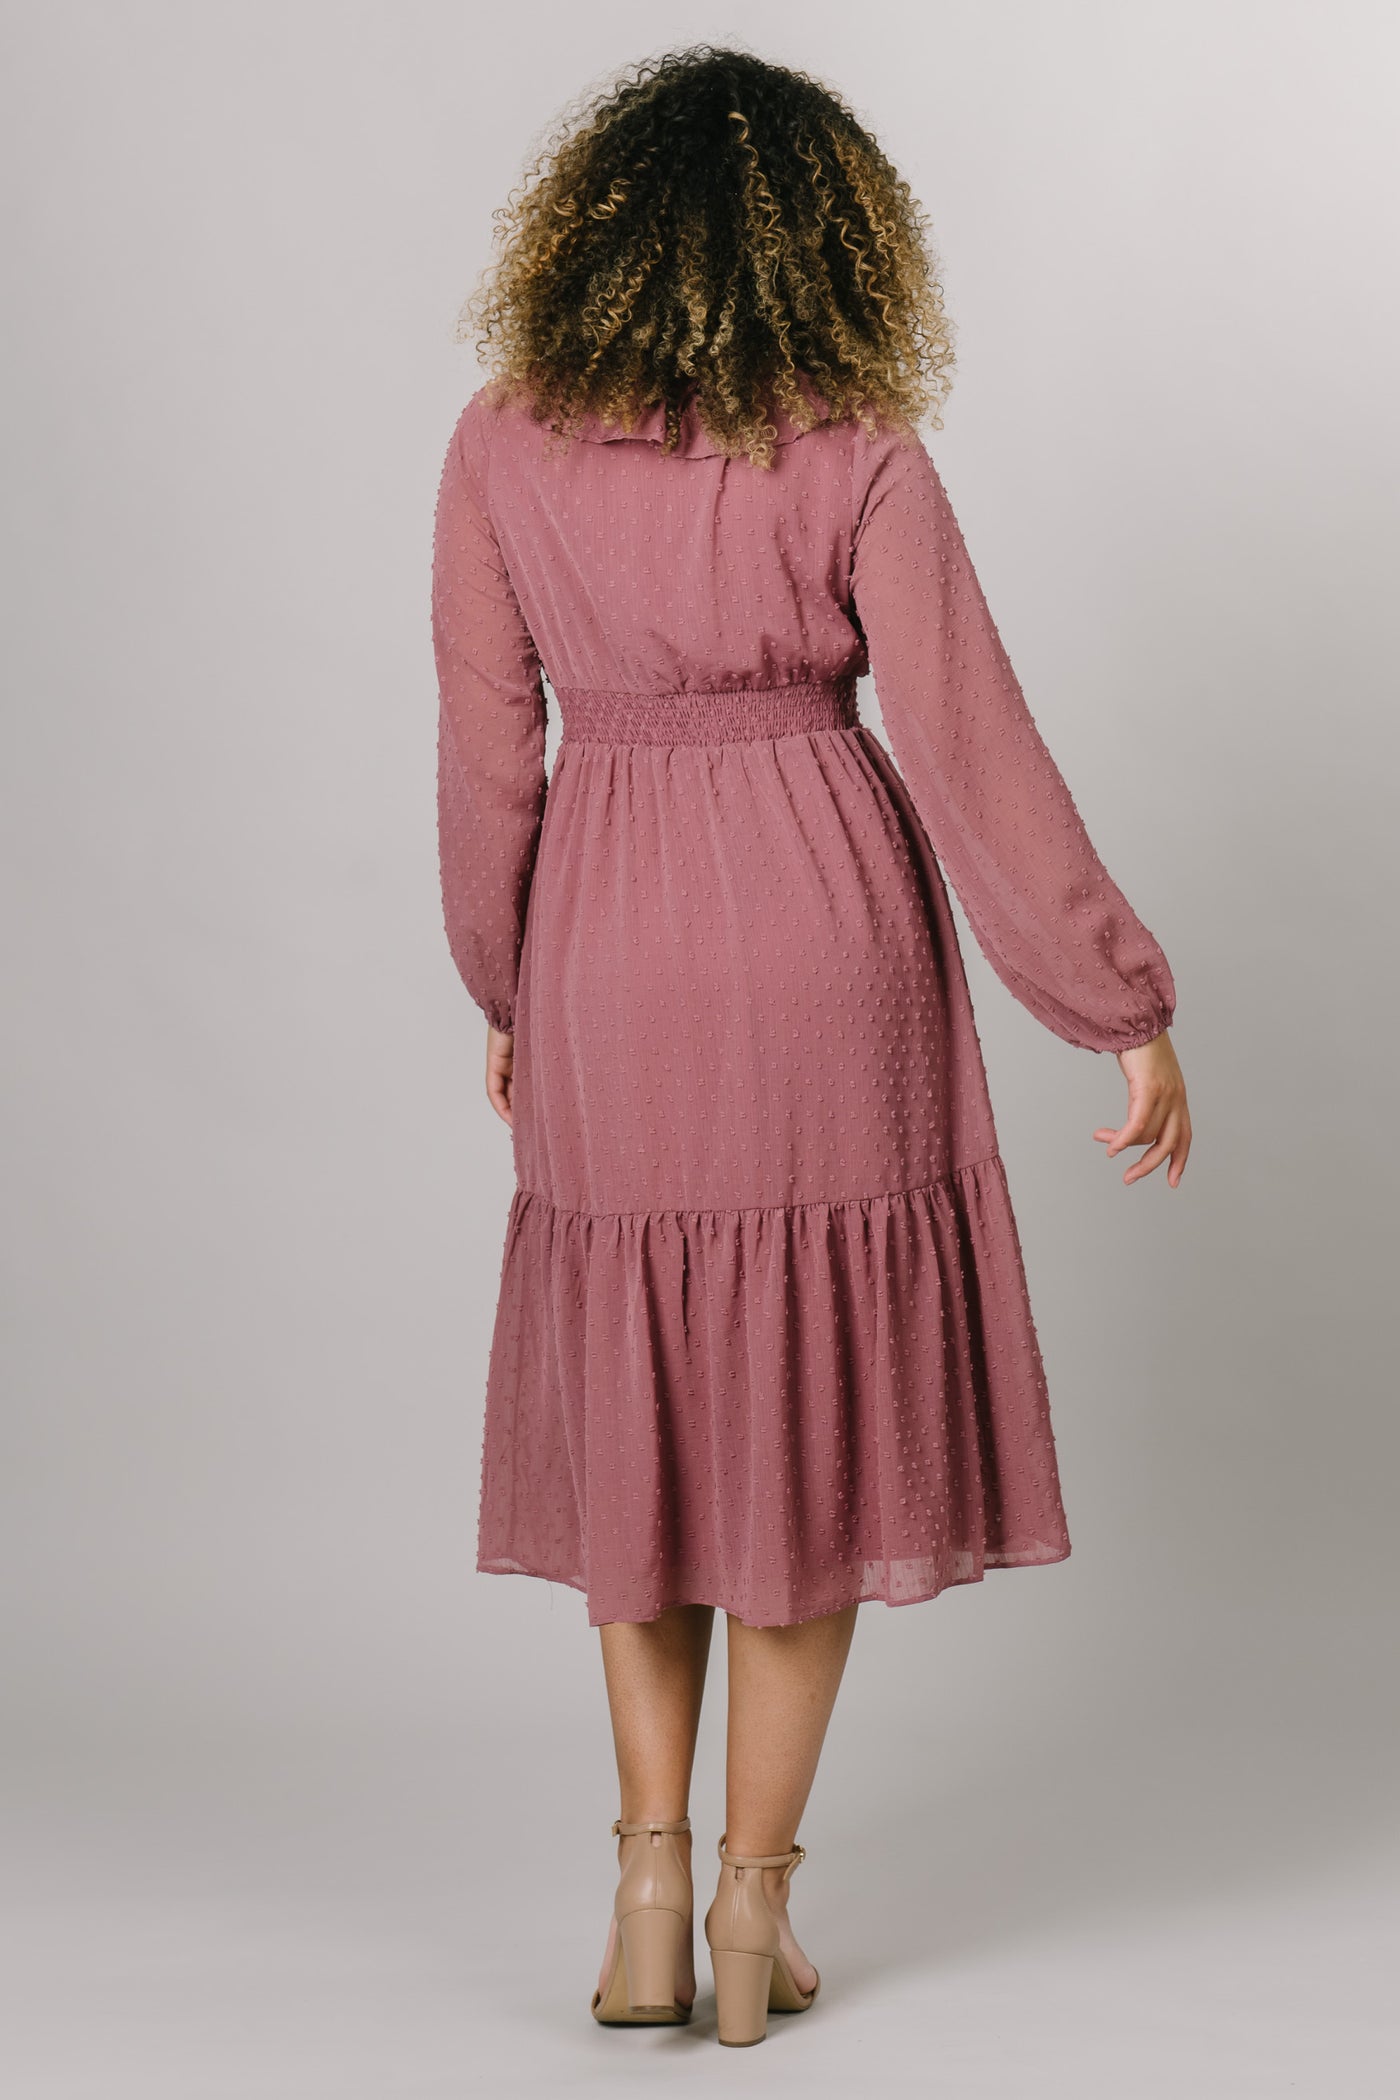 Back view of long sleeves with swiss dot fabric all around. Modest Dresses - - Everyday Dresses - Modest Prom Dress - Formalwear Modest Dresses - Bridesmaid Modest Dresses.